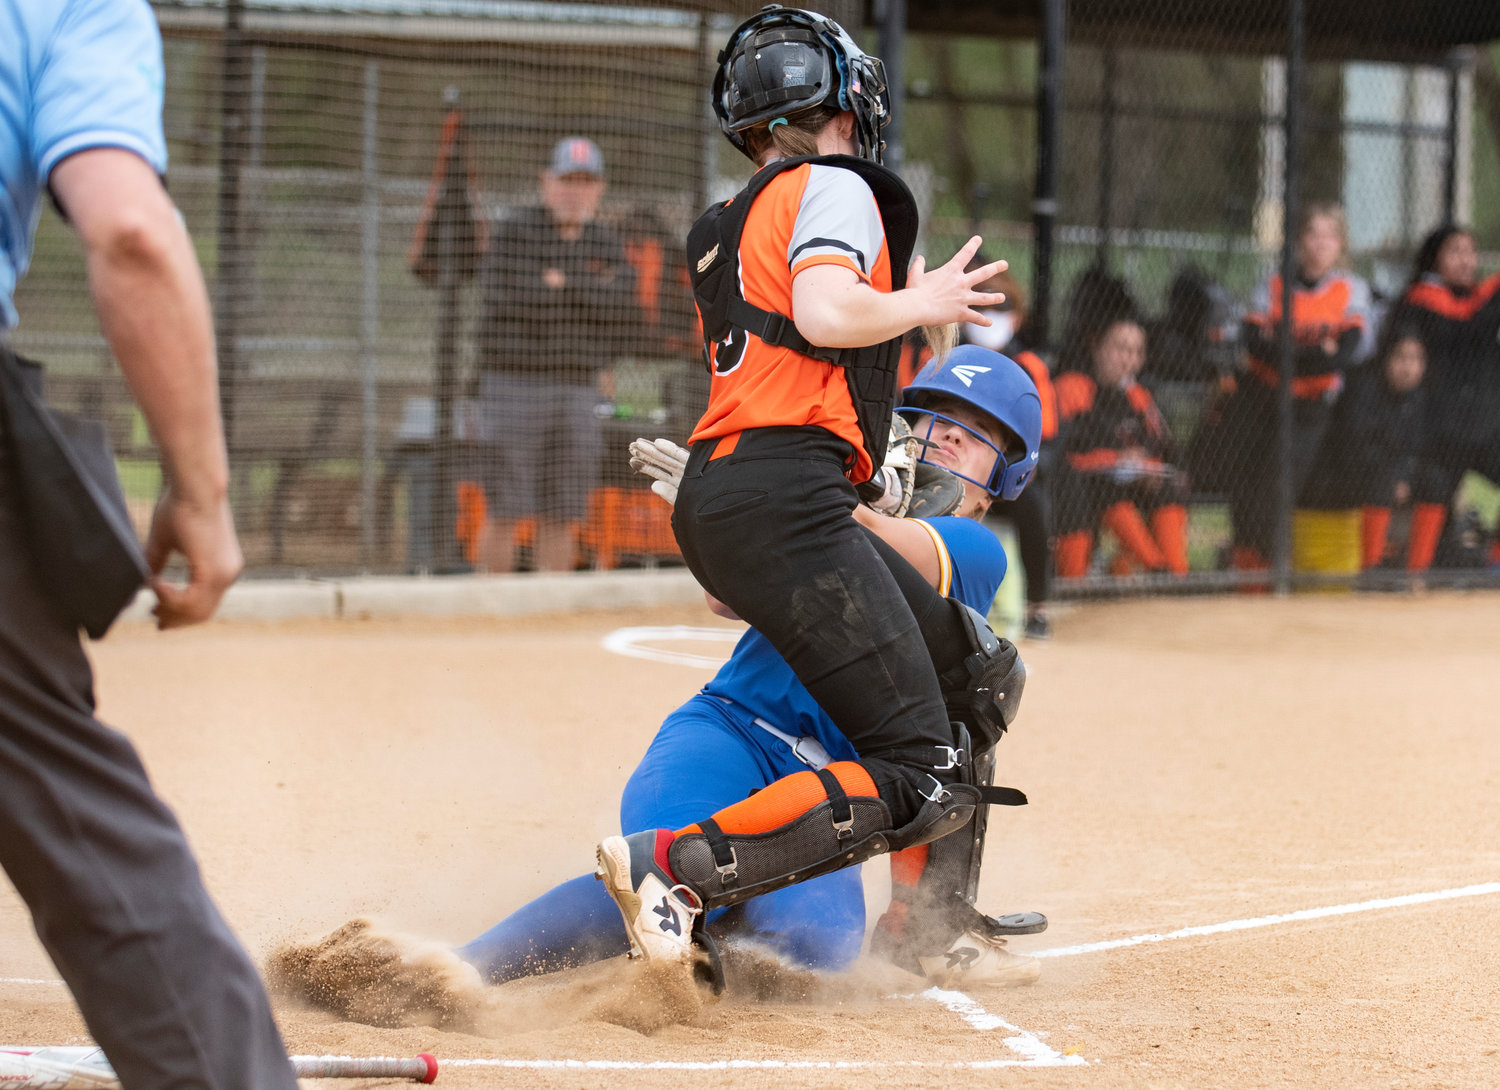 Rochester's Callie Crawford gets tagged out sliding into home plate on Friday by Centralia catcher Courtney Spriggs.